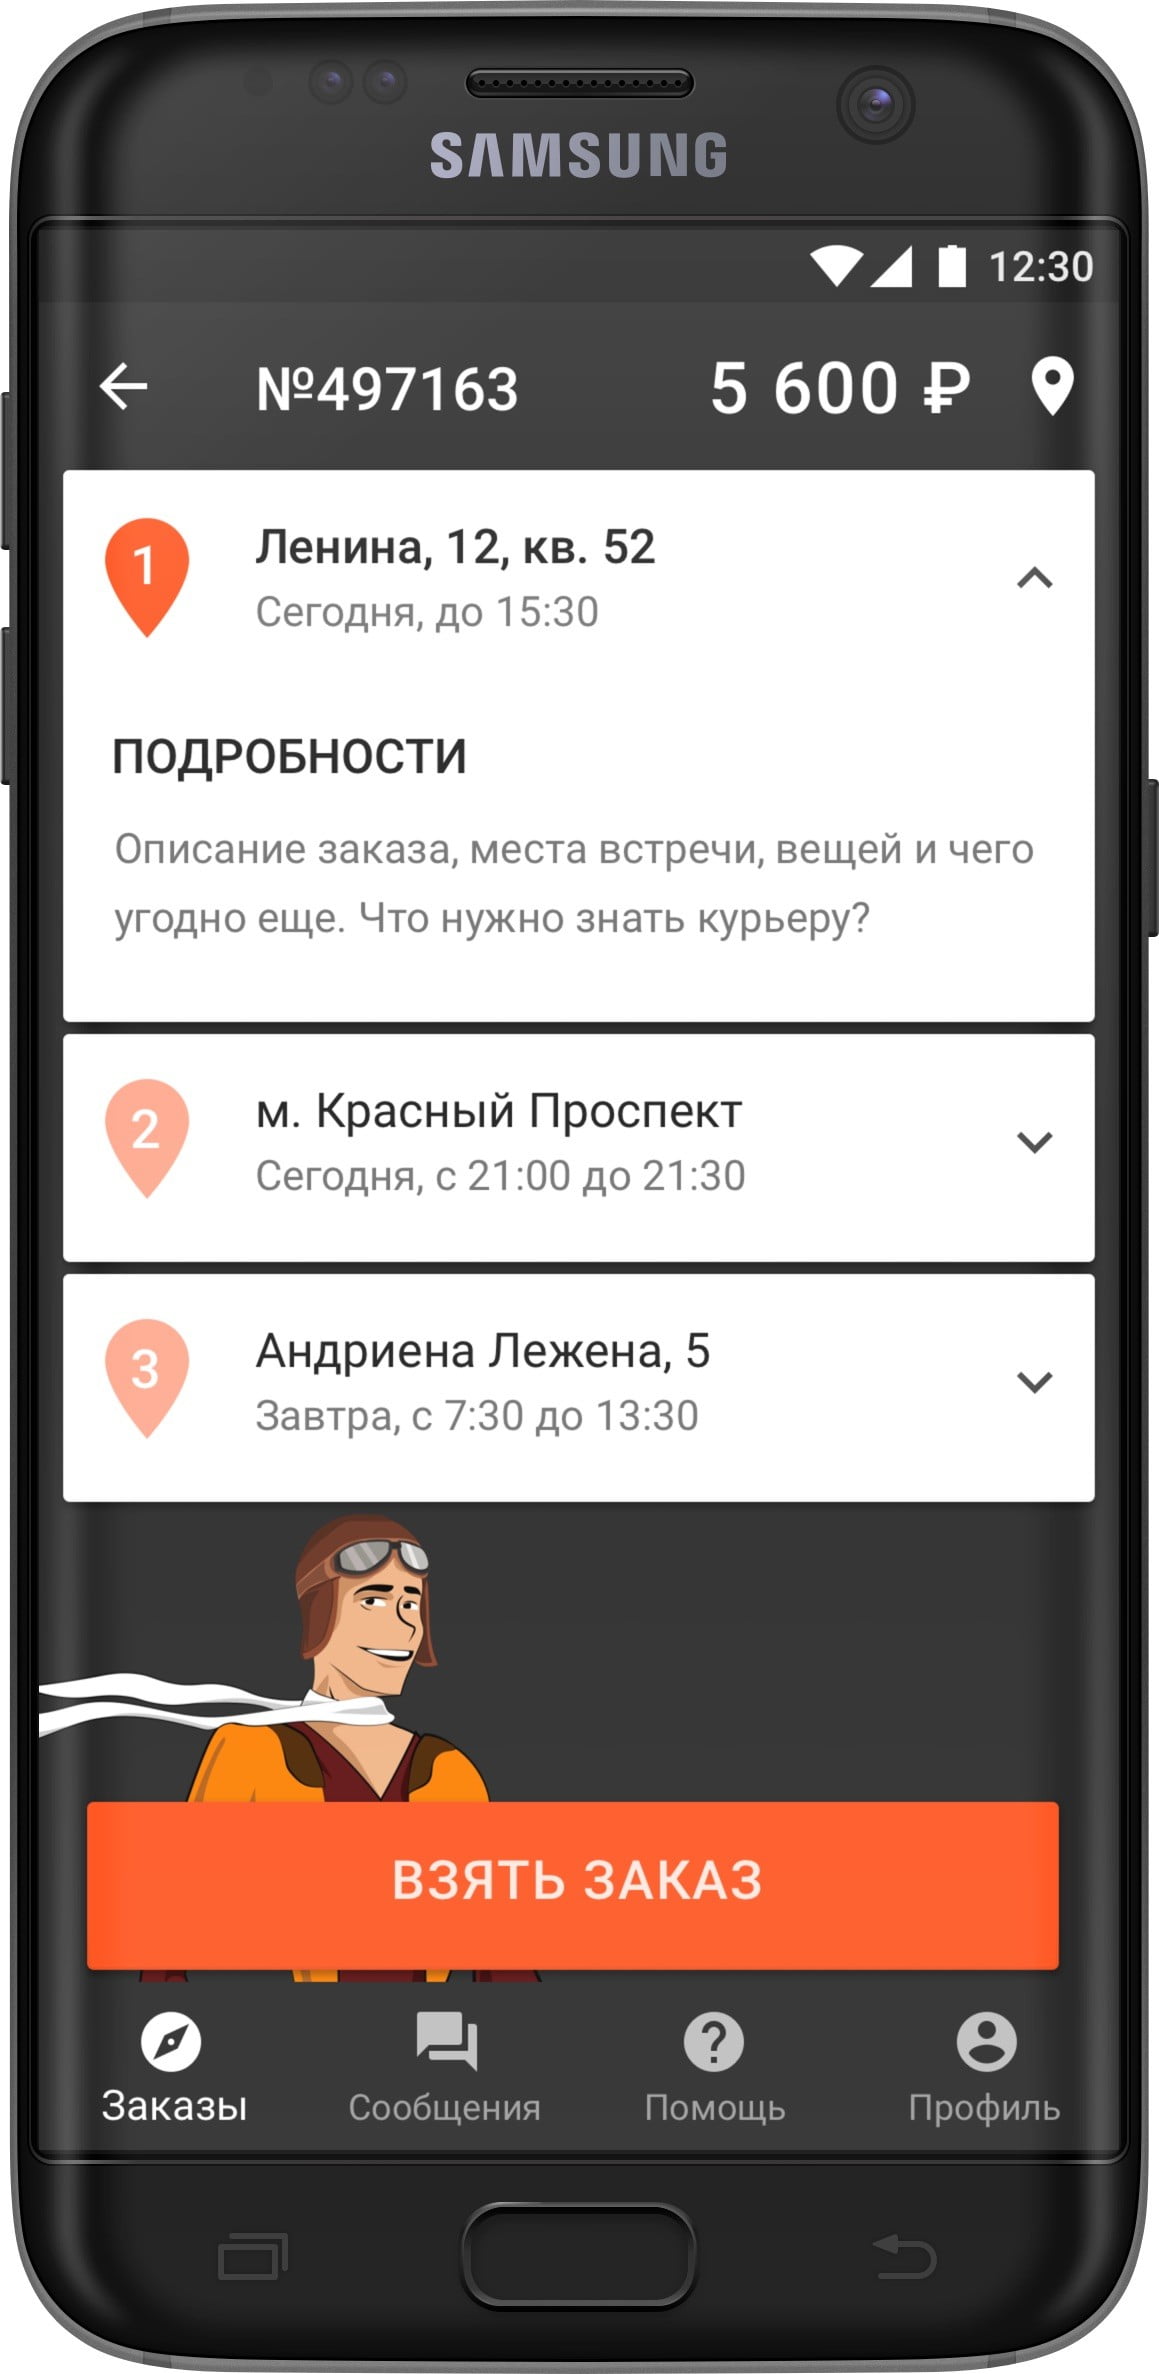 Fierly Express mobile app Artur Netsvetaev UI Designer & Product Manager: websites, apps, prototypes and interface design fierly android app 2 by artur netsvetaev design